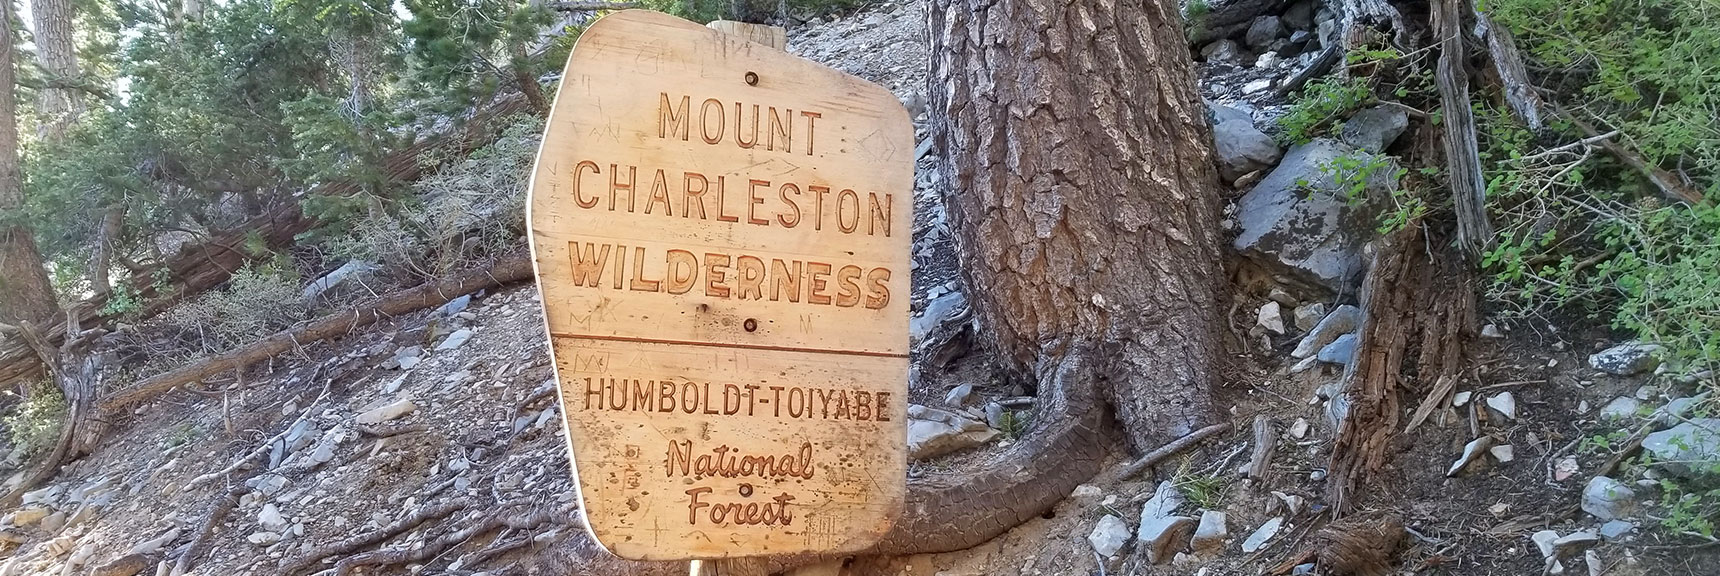 About Half Way to Griffith Peak on South Climb Trail in Mt Charleston Wilderness, Nevada